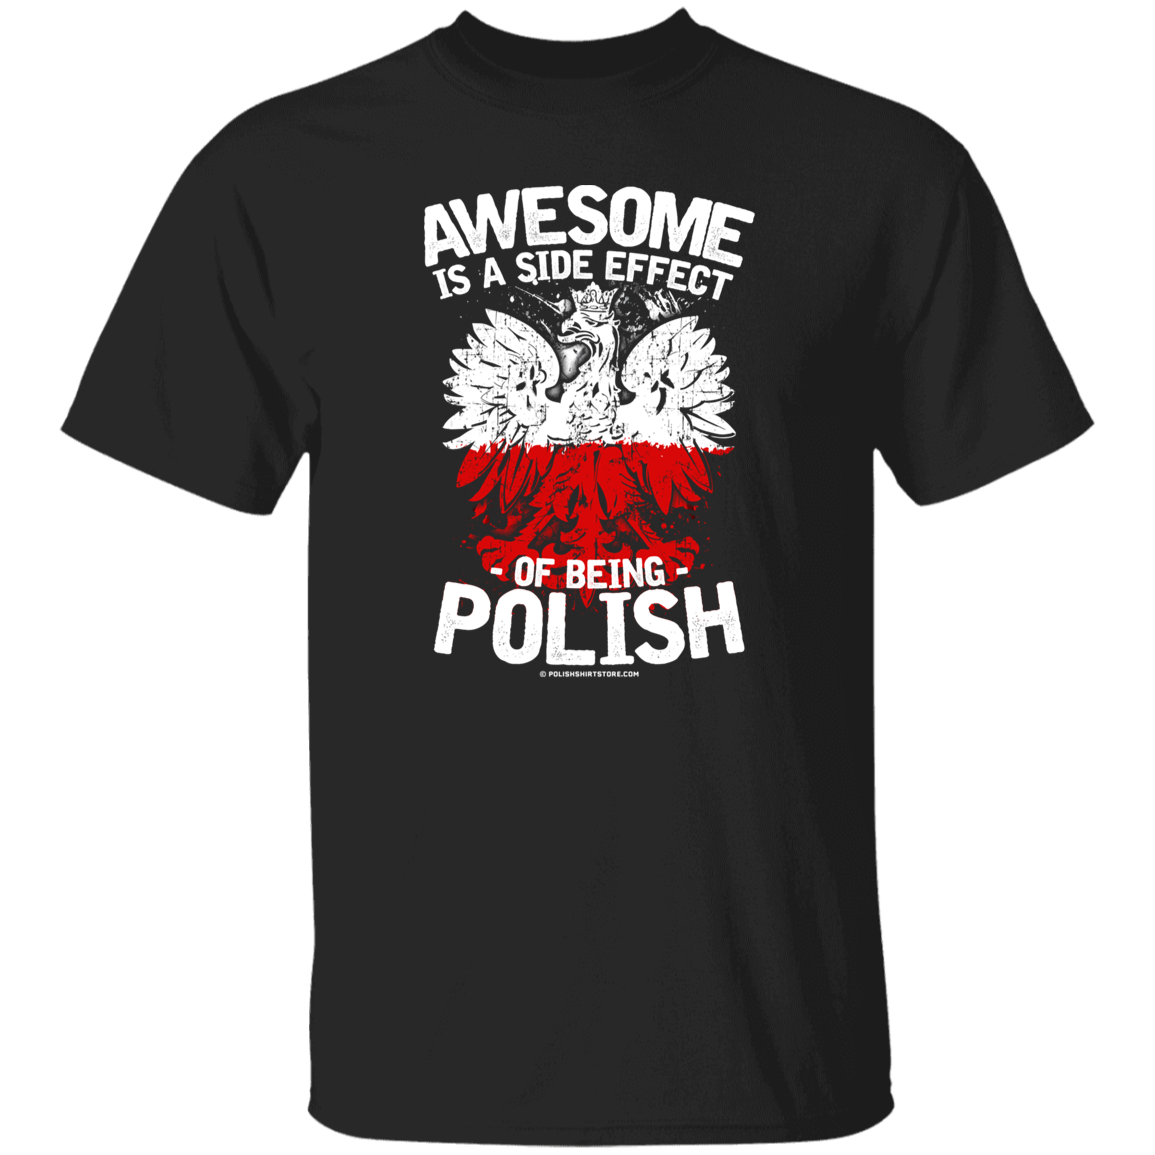 Awesome Is A Side Effect Of Being Polish Apparel CustomCat G500 5.3 oz. T-Shirt Black S